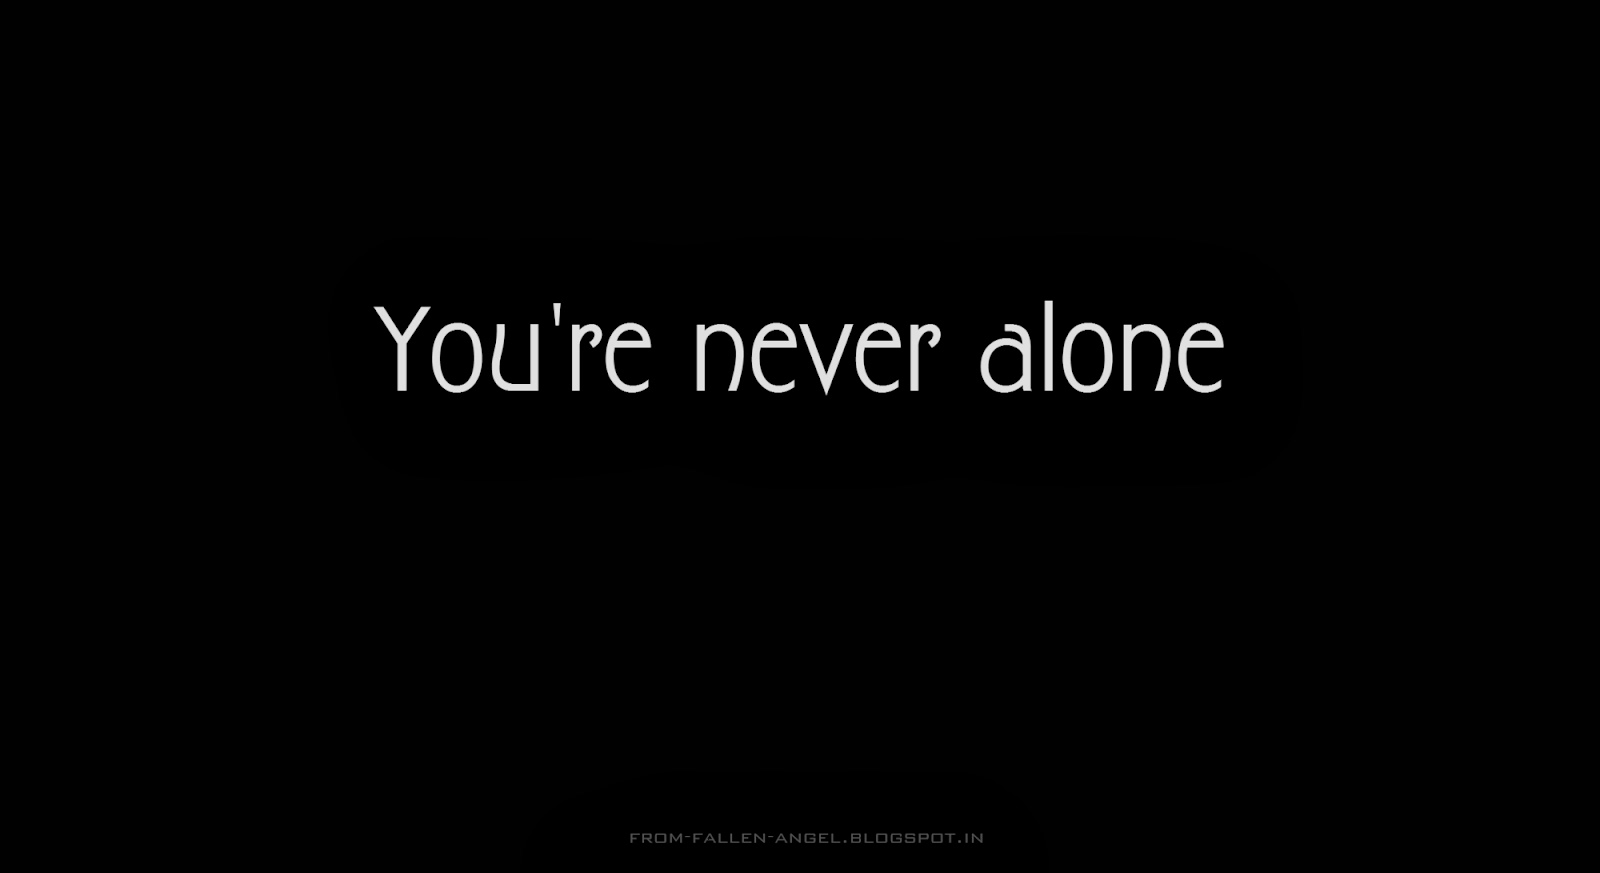 You're never alone